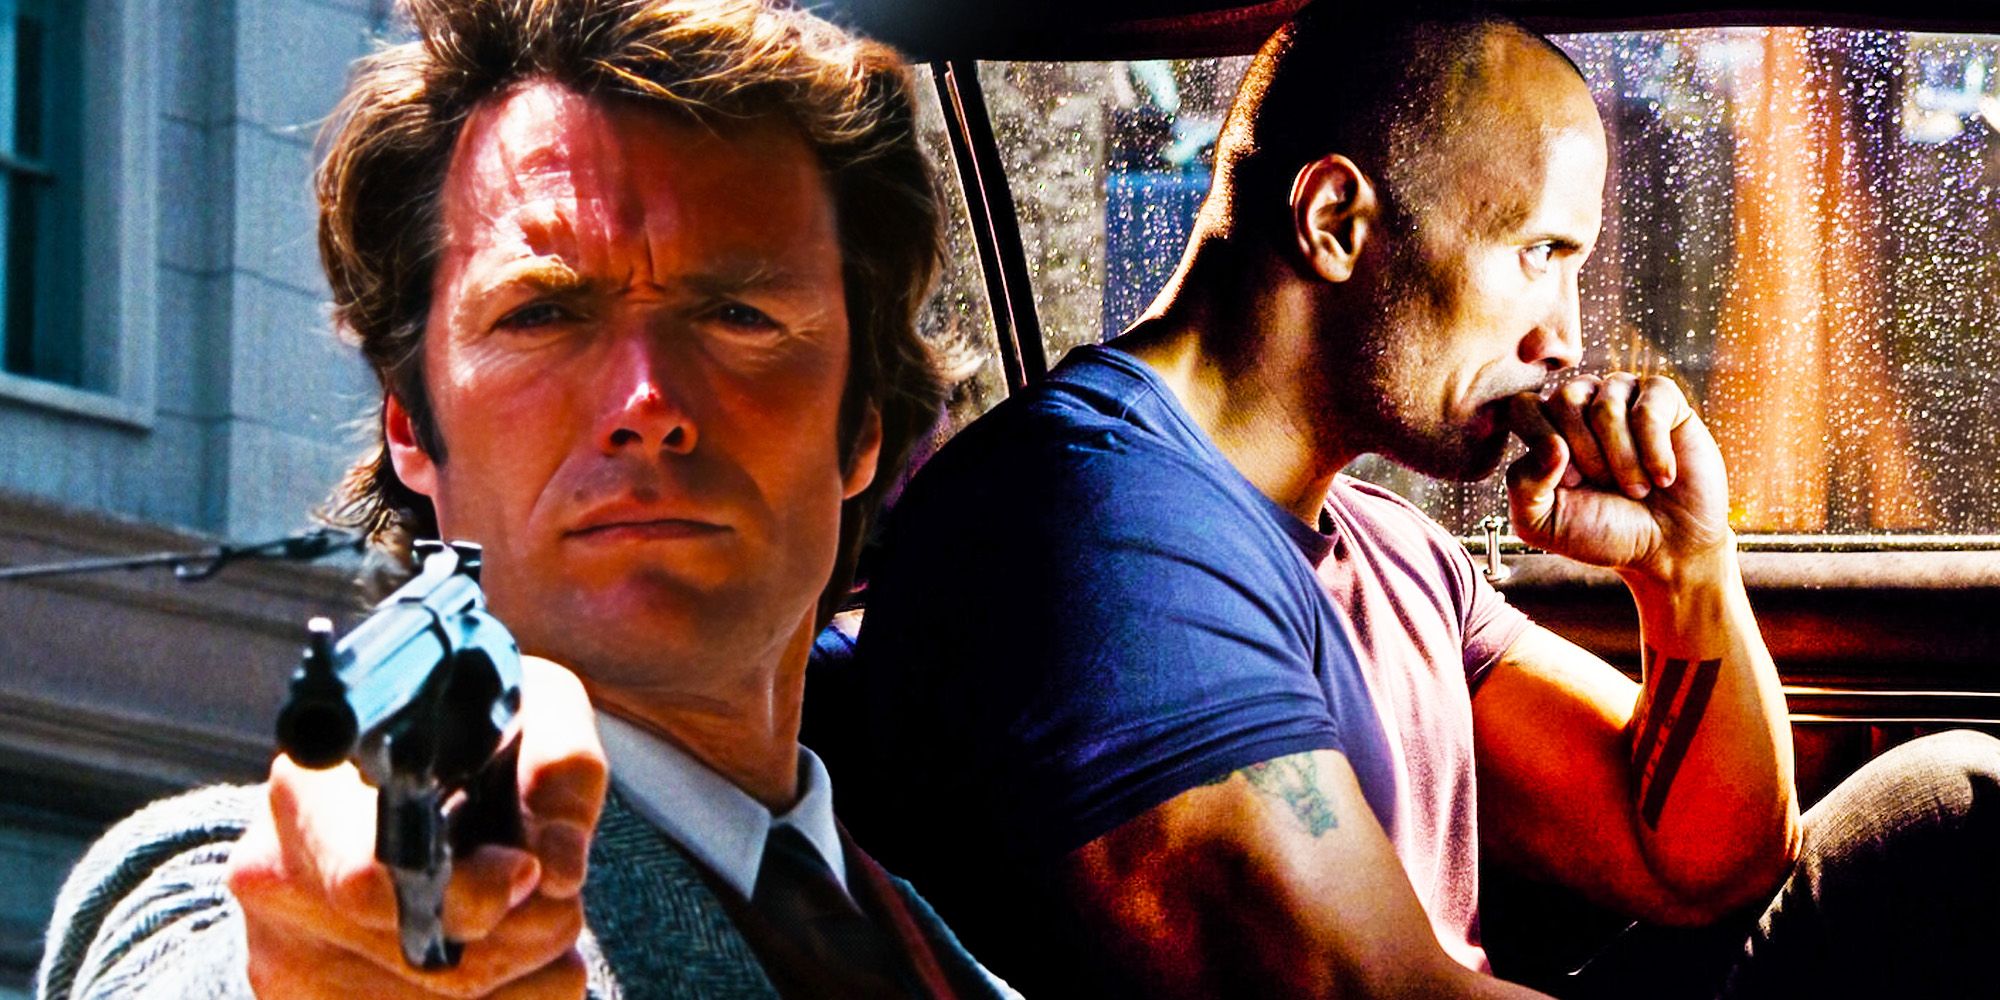 Could A Dirty Harry Remake Really Happen? Clint Eastwood Isn't Against It